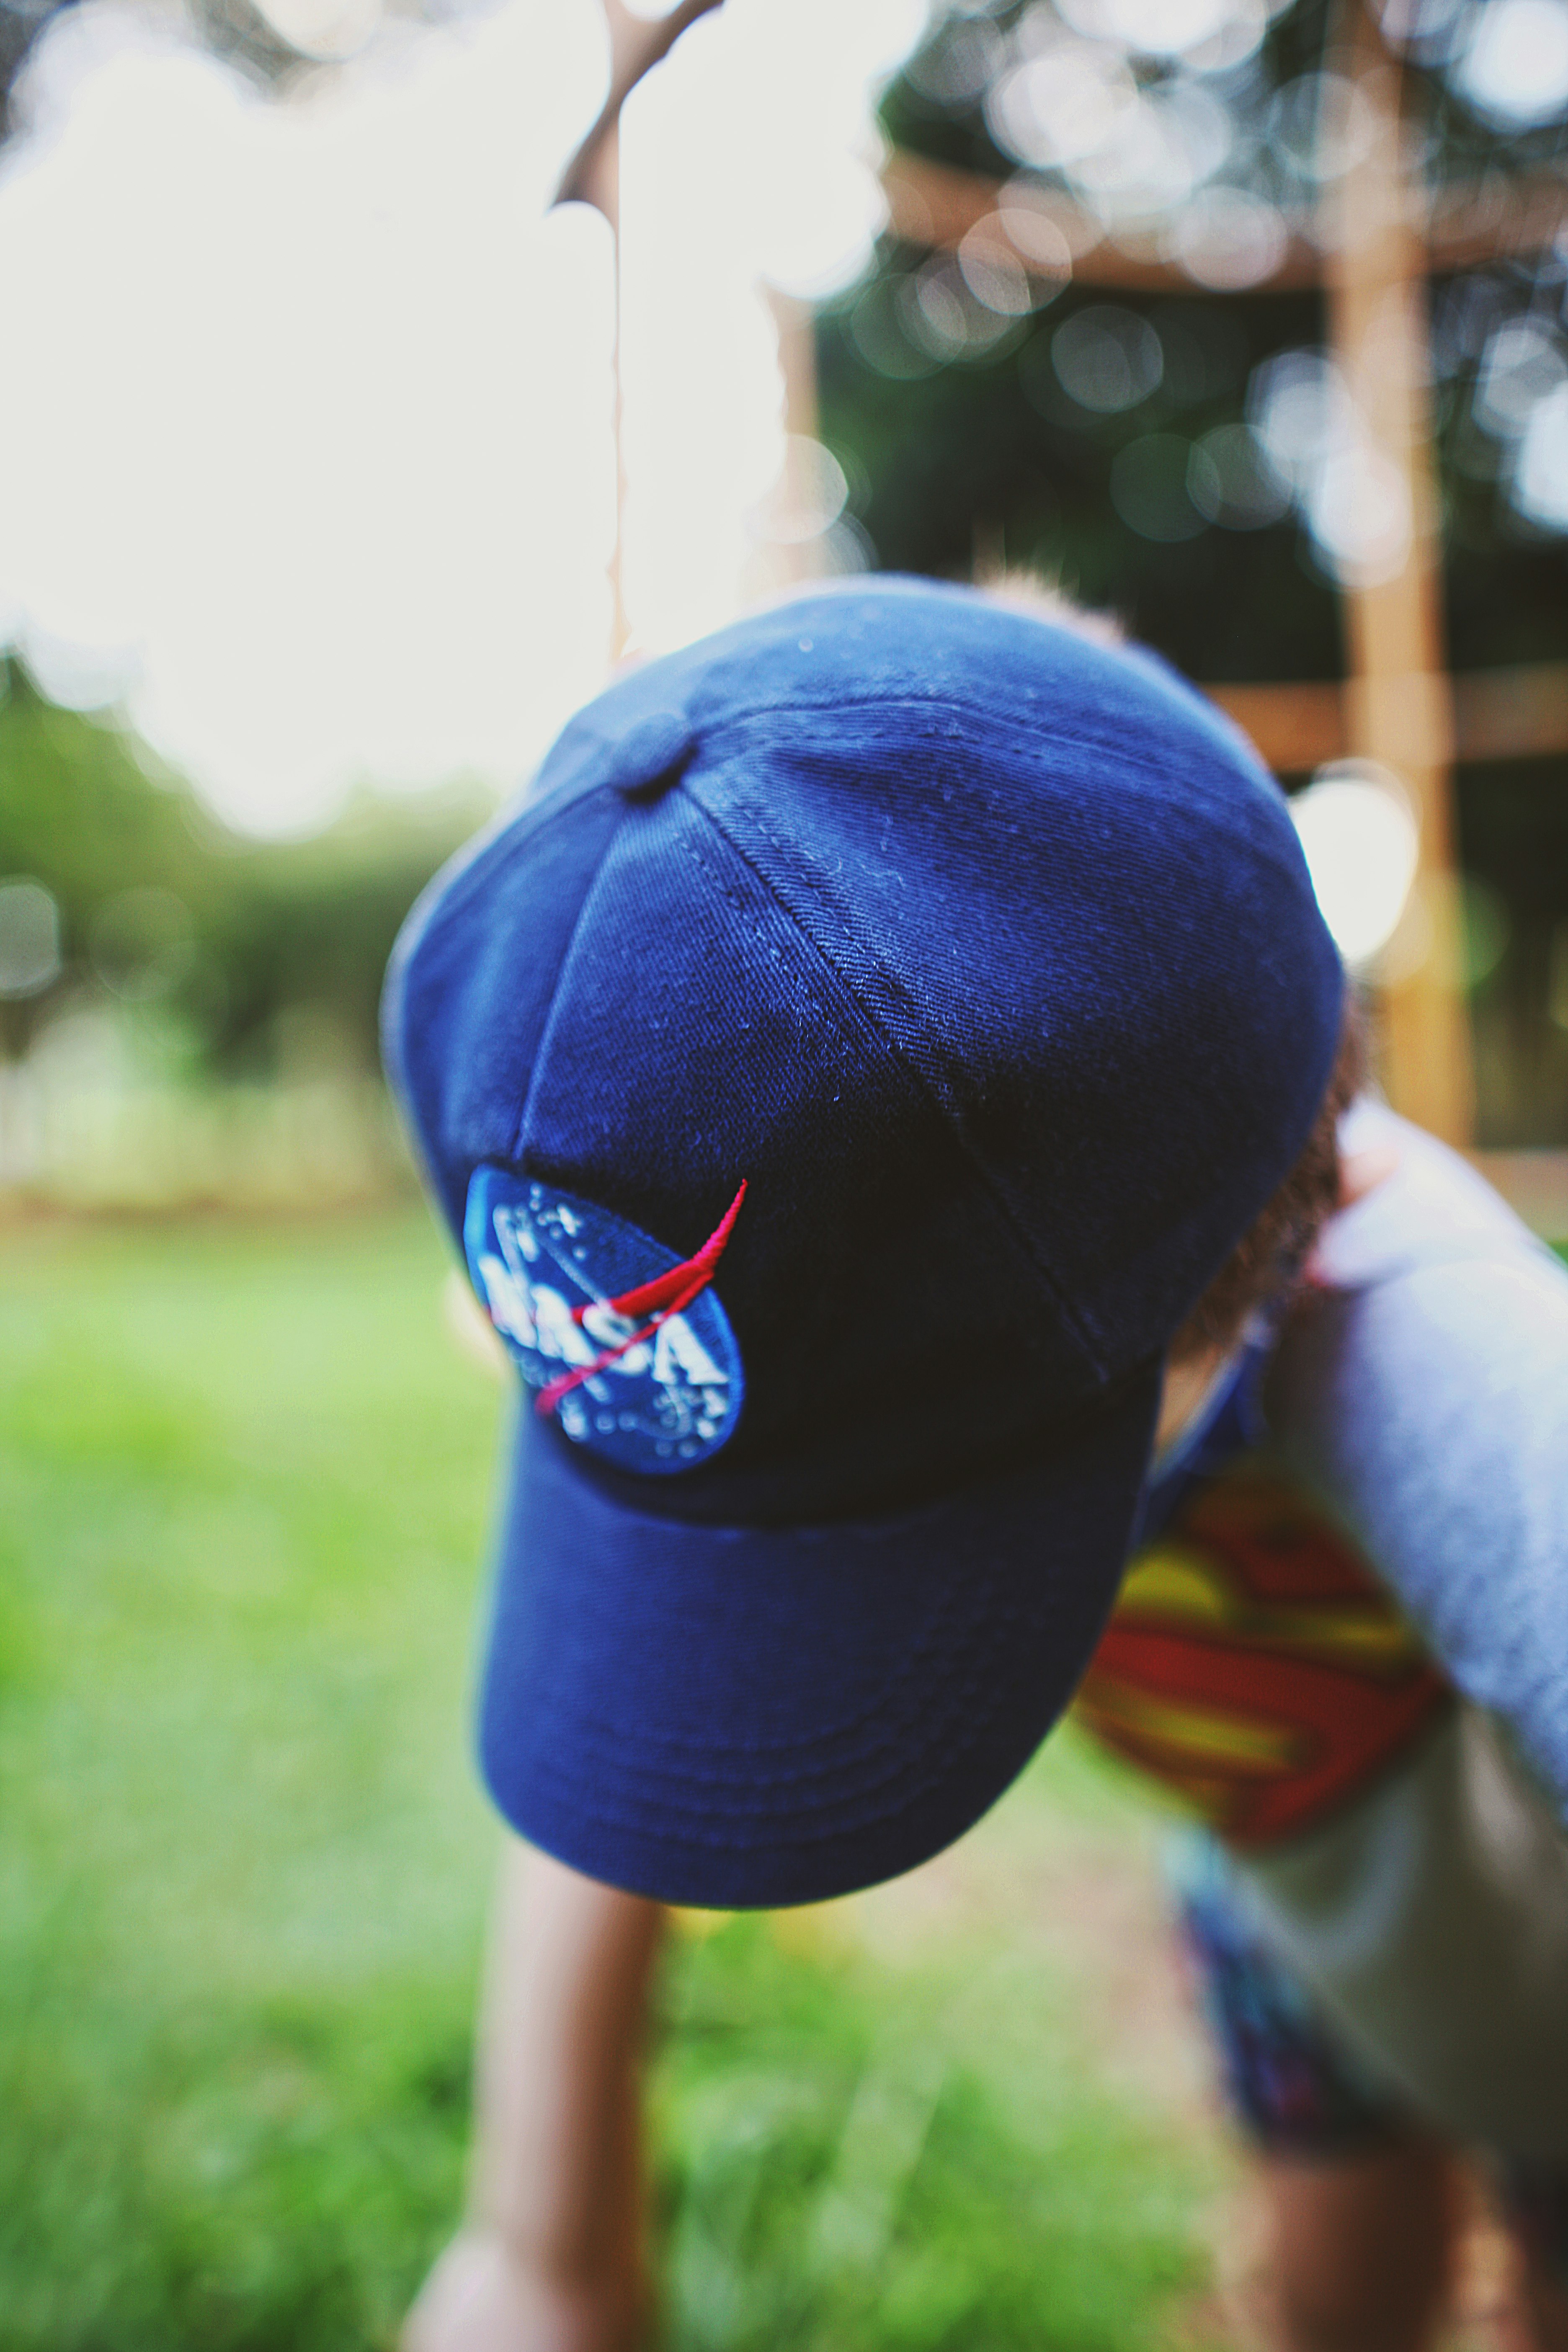 person holding blue and red baseball cap